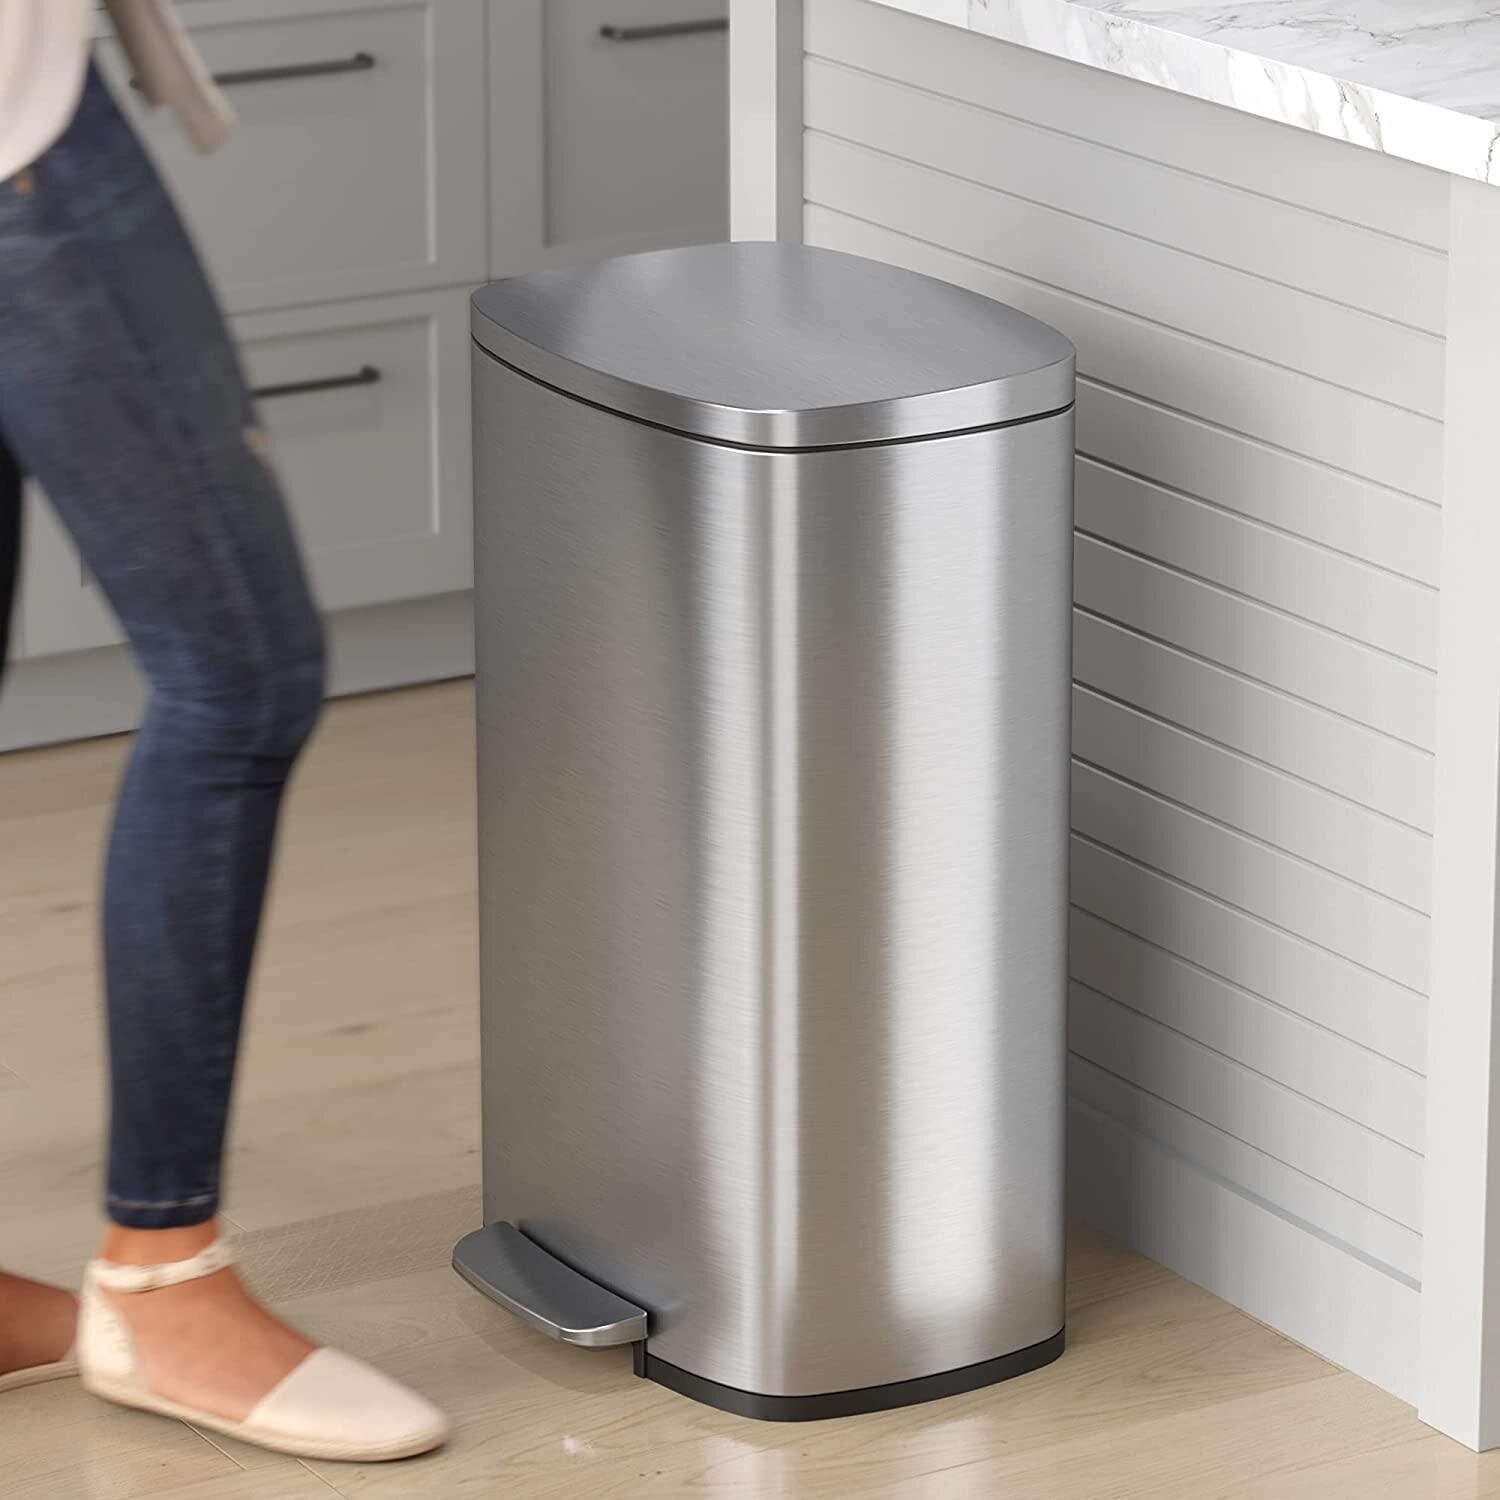 H+lux Small Trash Can with Lid Soft Close, Foot Pedal Round Bathroom  Garbage Can with Stainless Steel Removable Inner Wastebasket,  Anti-Fingerprint